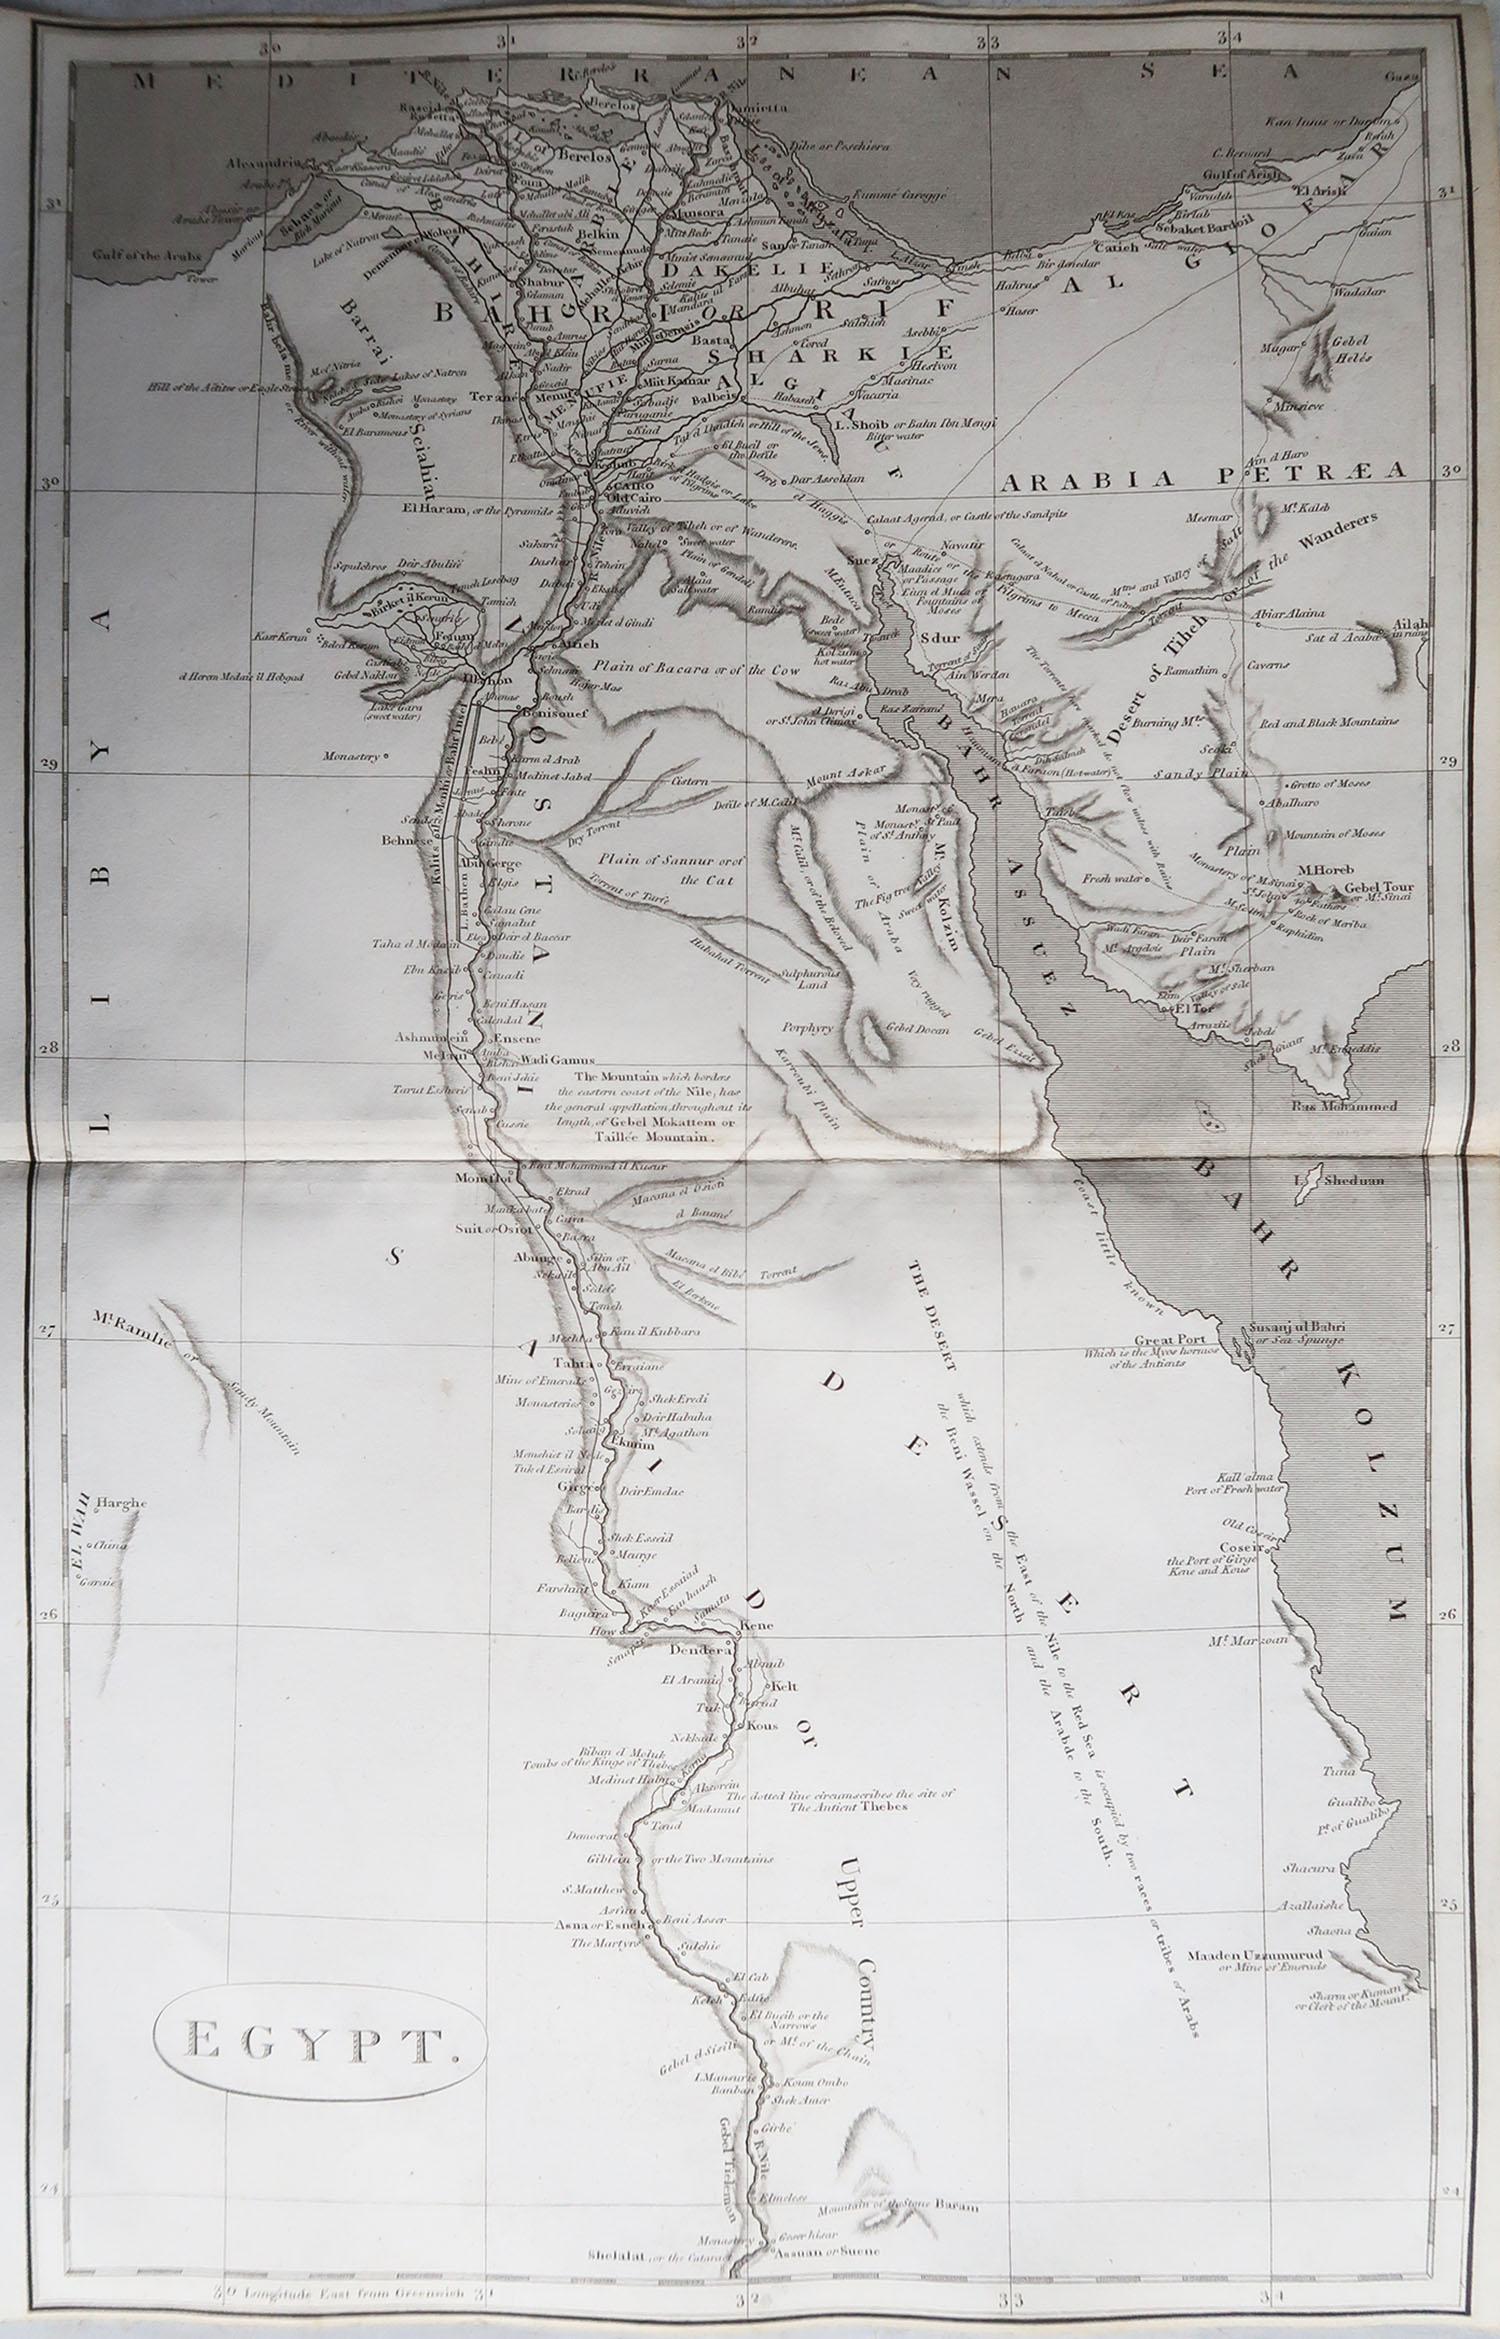 Great map of Egypt

Drawn under the direction of Arrowsmith.

Copper-plate engraving.

Published by Longman, Hurst, Rees, Orme and Brown, 1820

Unframed.